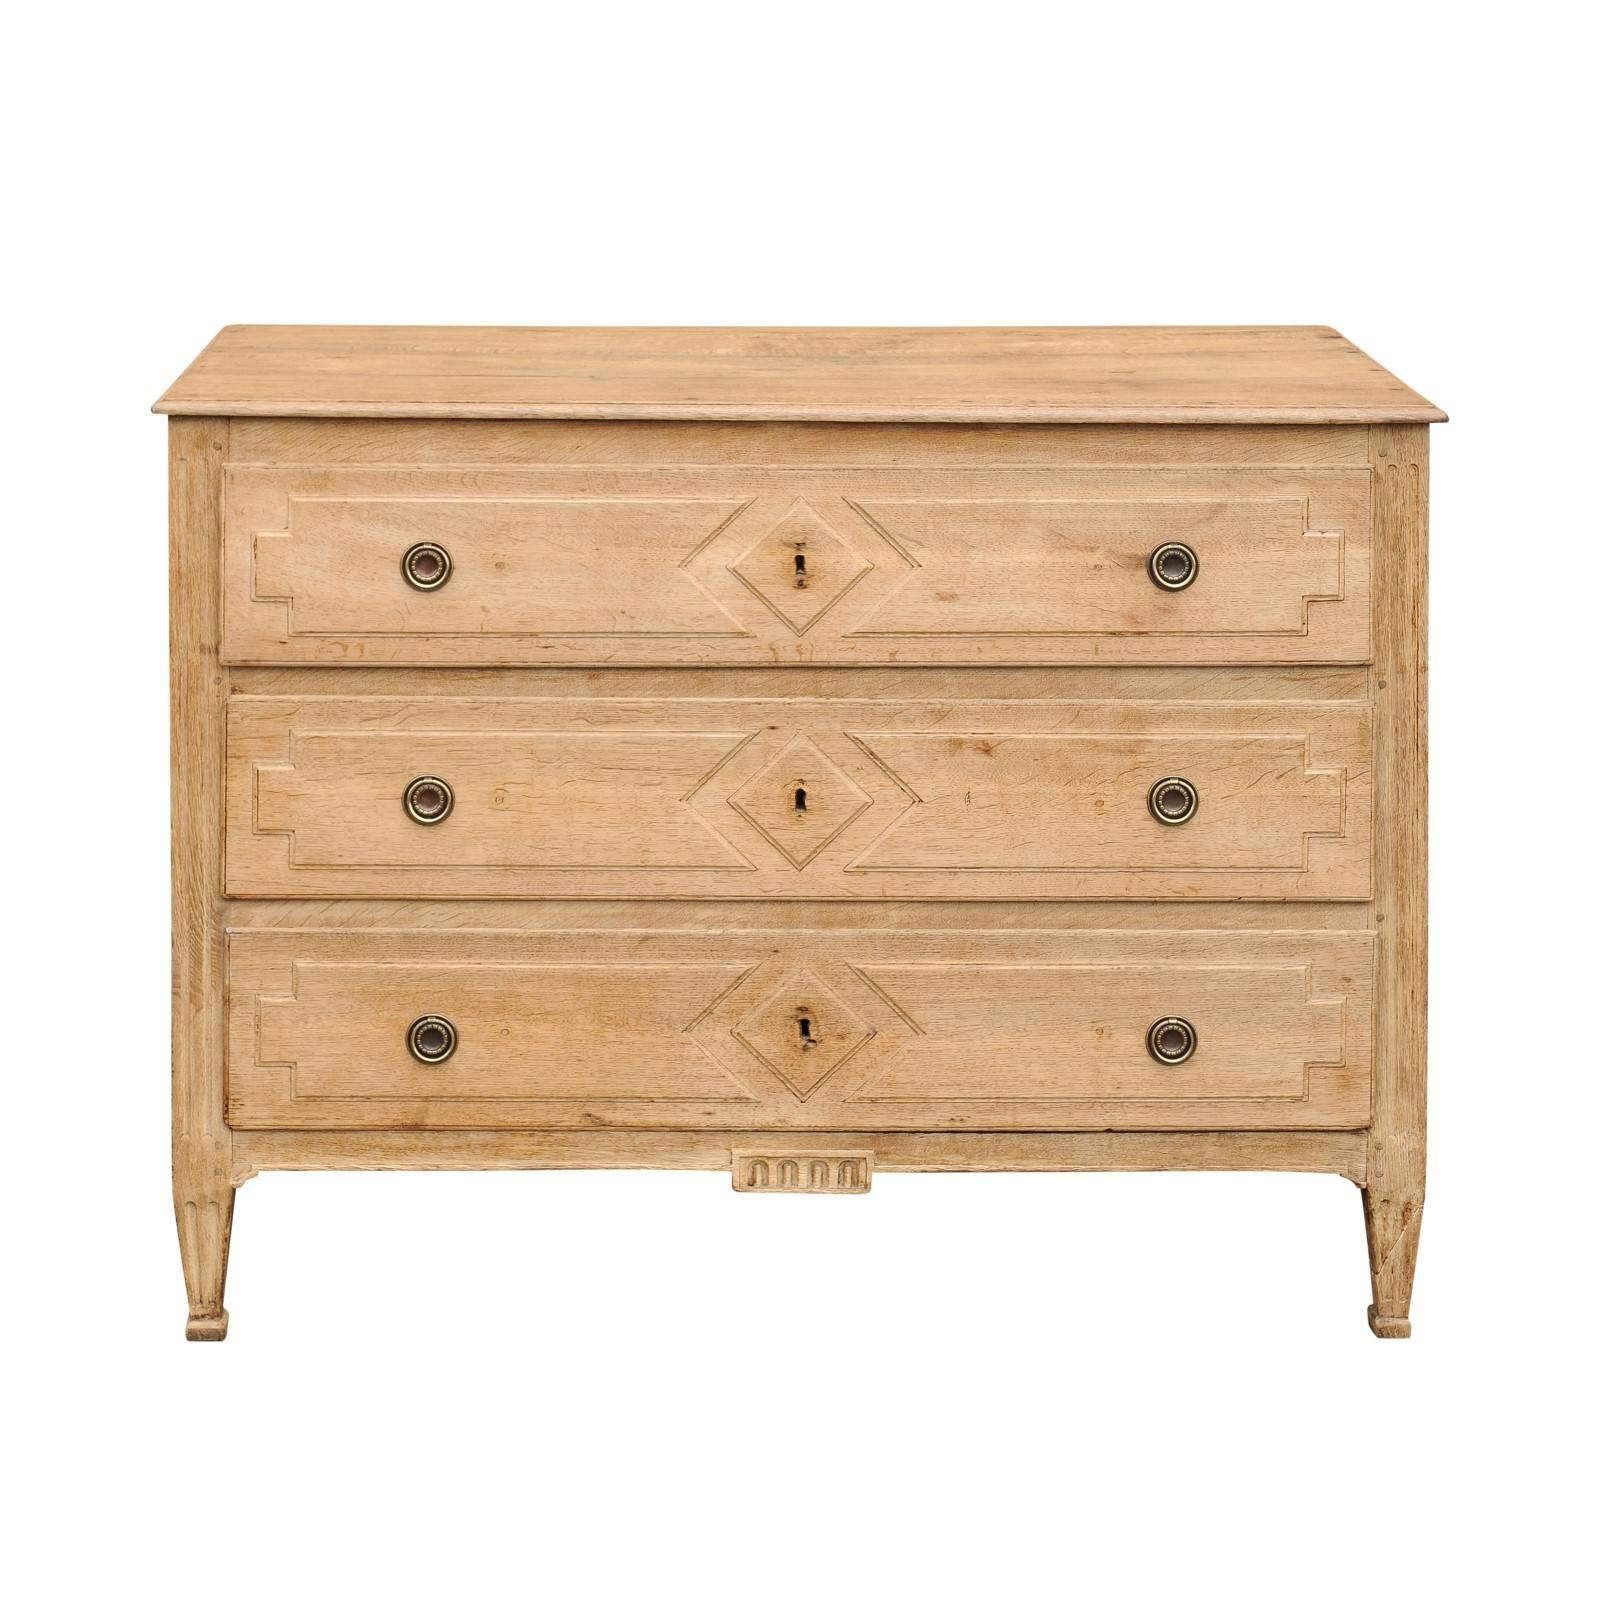 French Neoclassical Style Bleached Oak Three-Drawer Commode, circa 1860